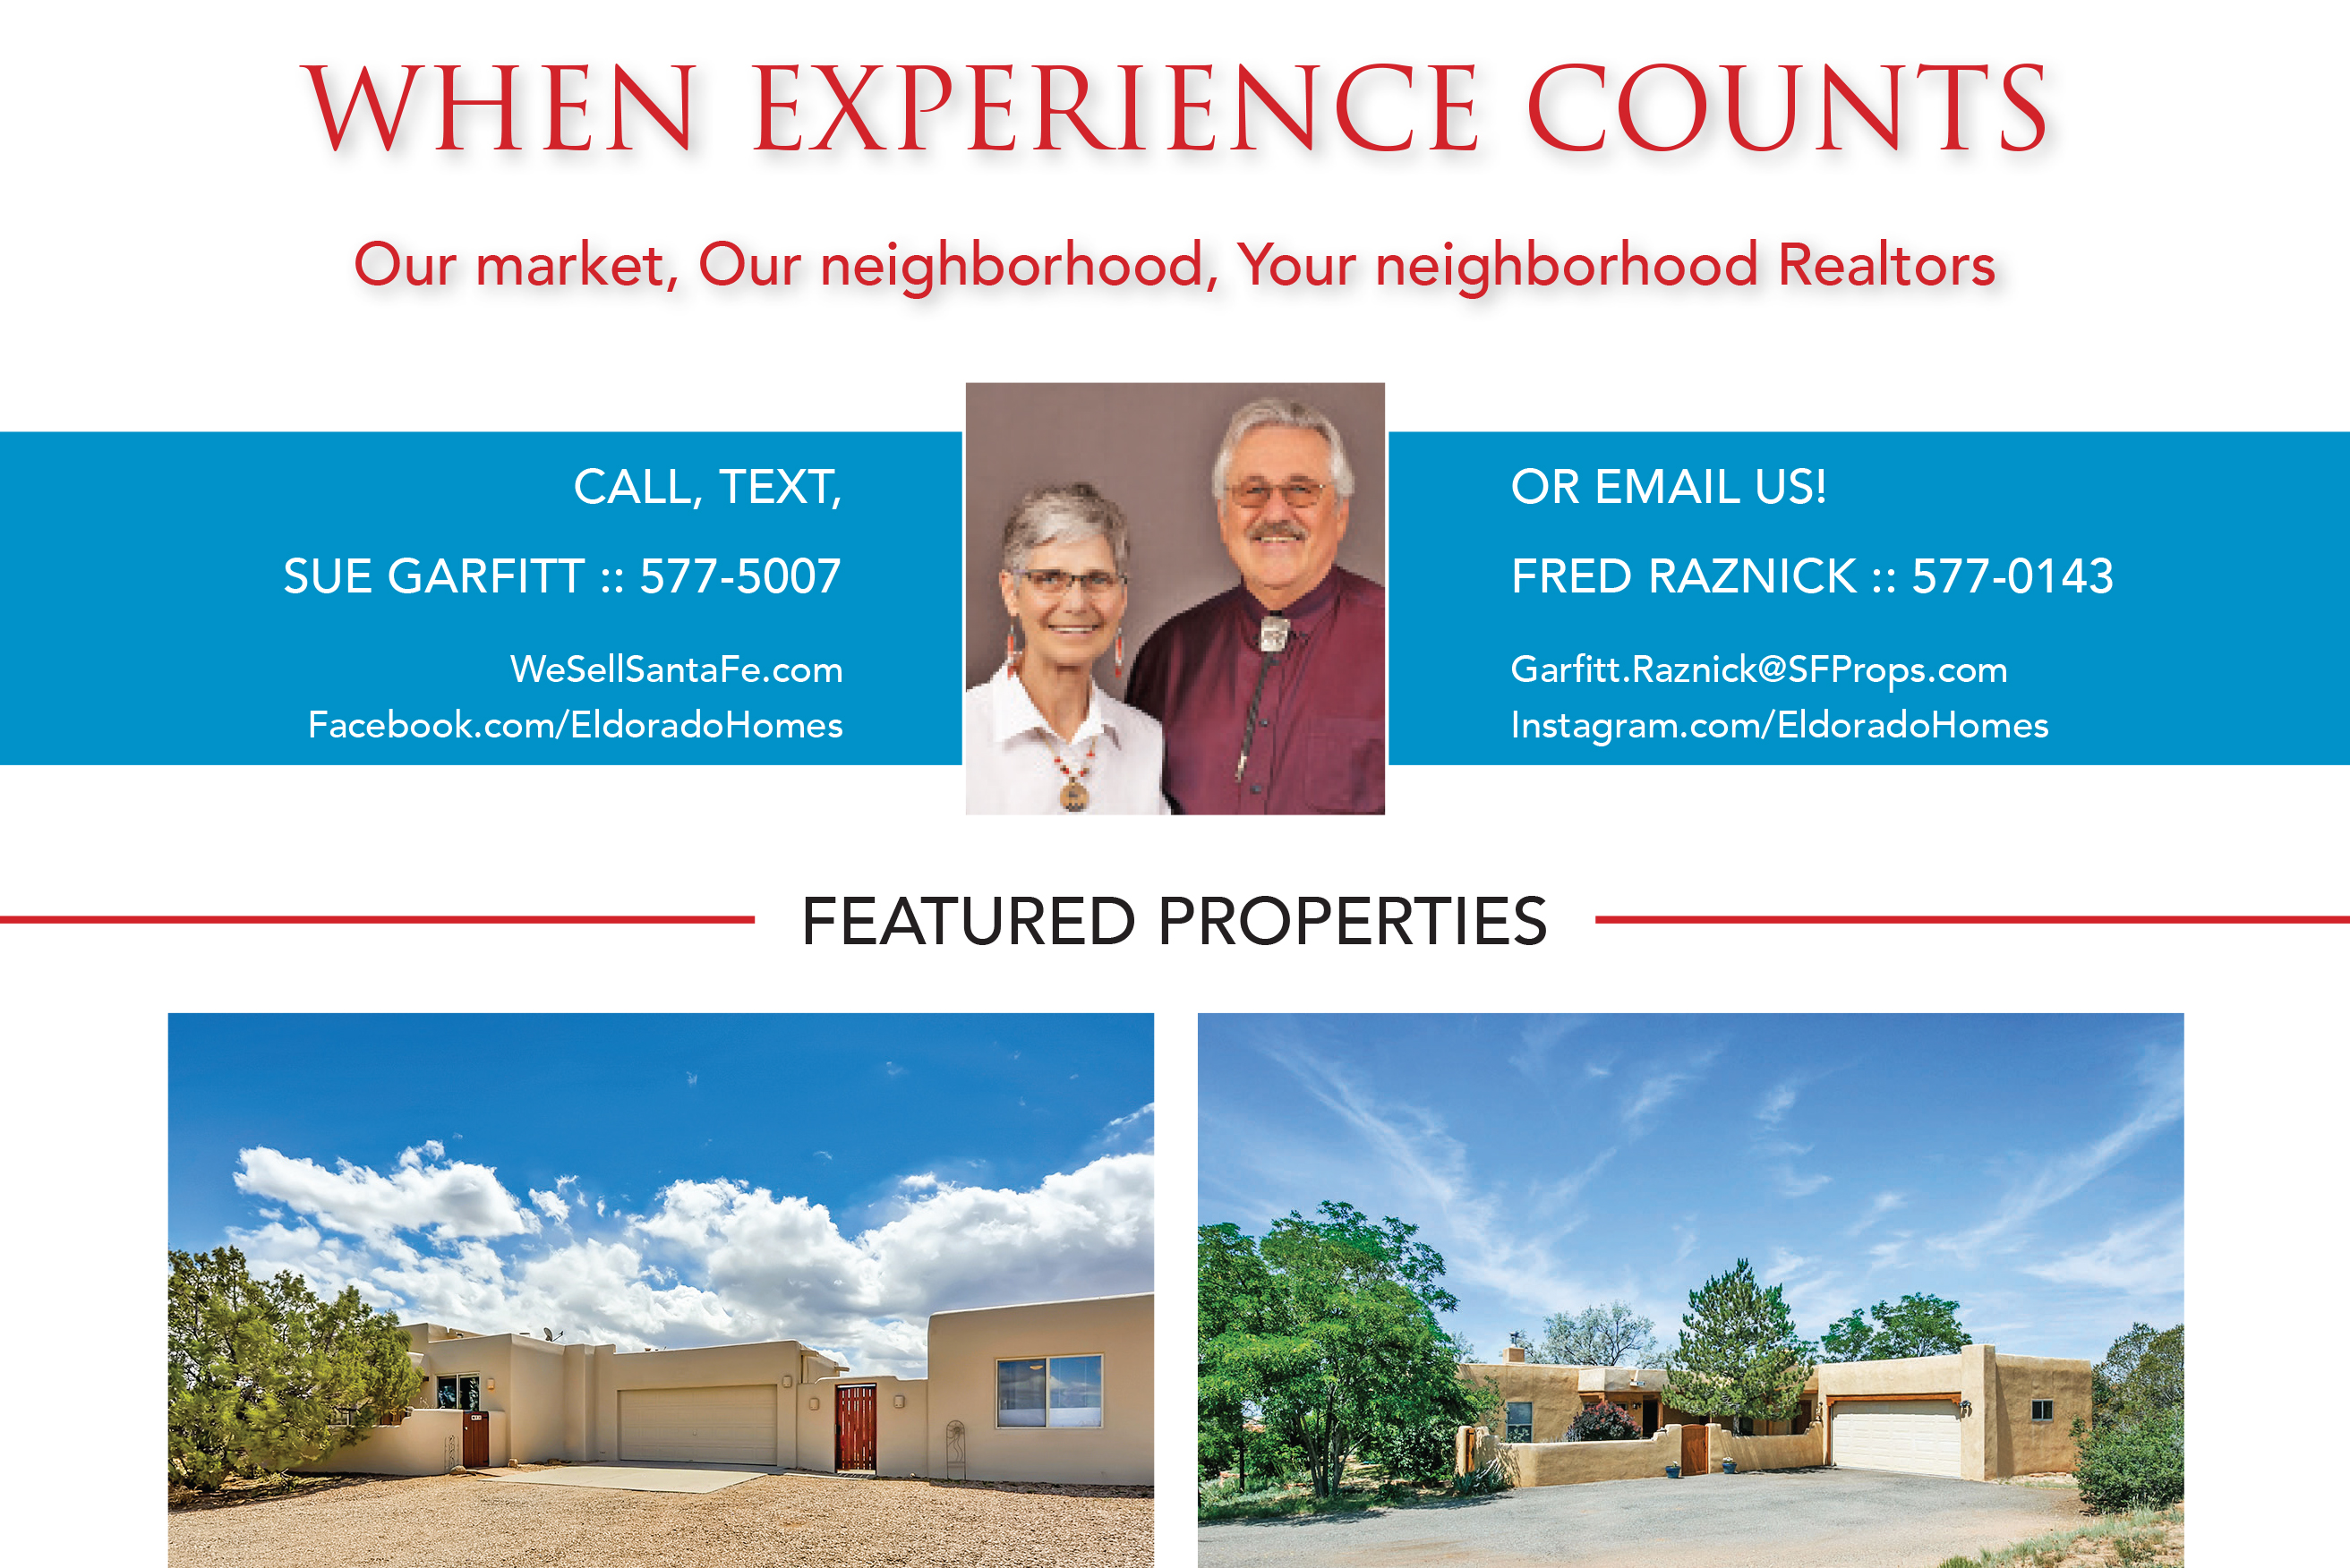 Did you see our ad in the June issue of Eldorado Living? 